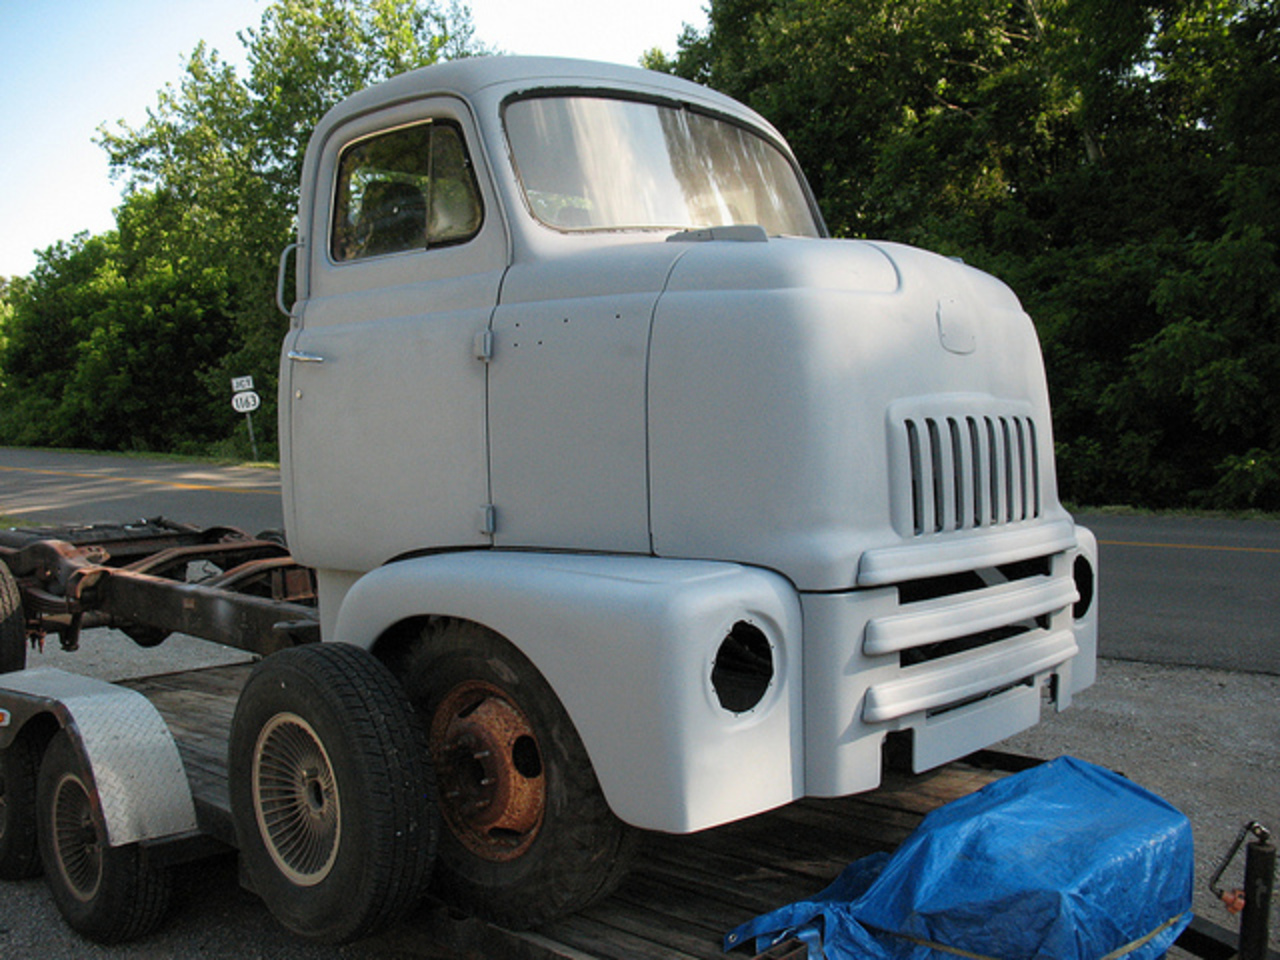 FOR SALE: 1952 International L-160 Series COE | Flickr - Photo ...